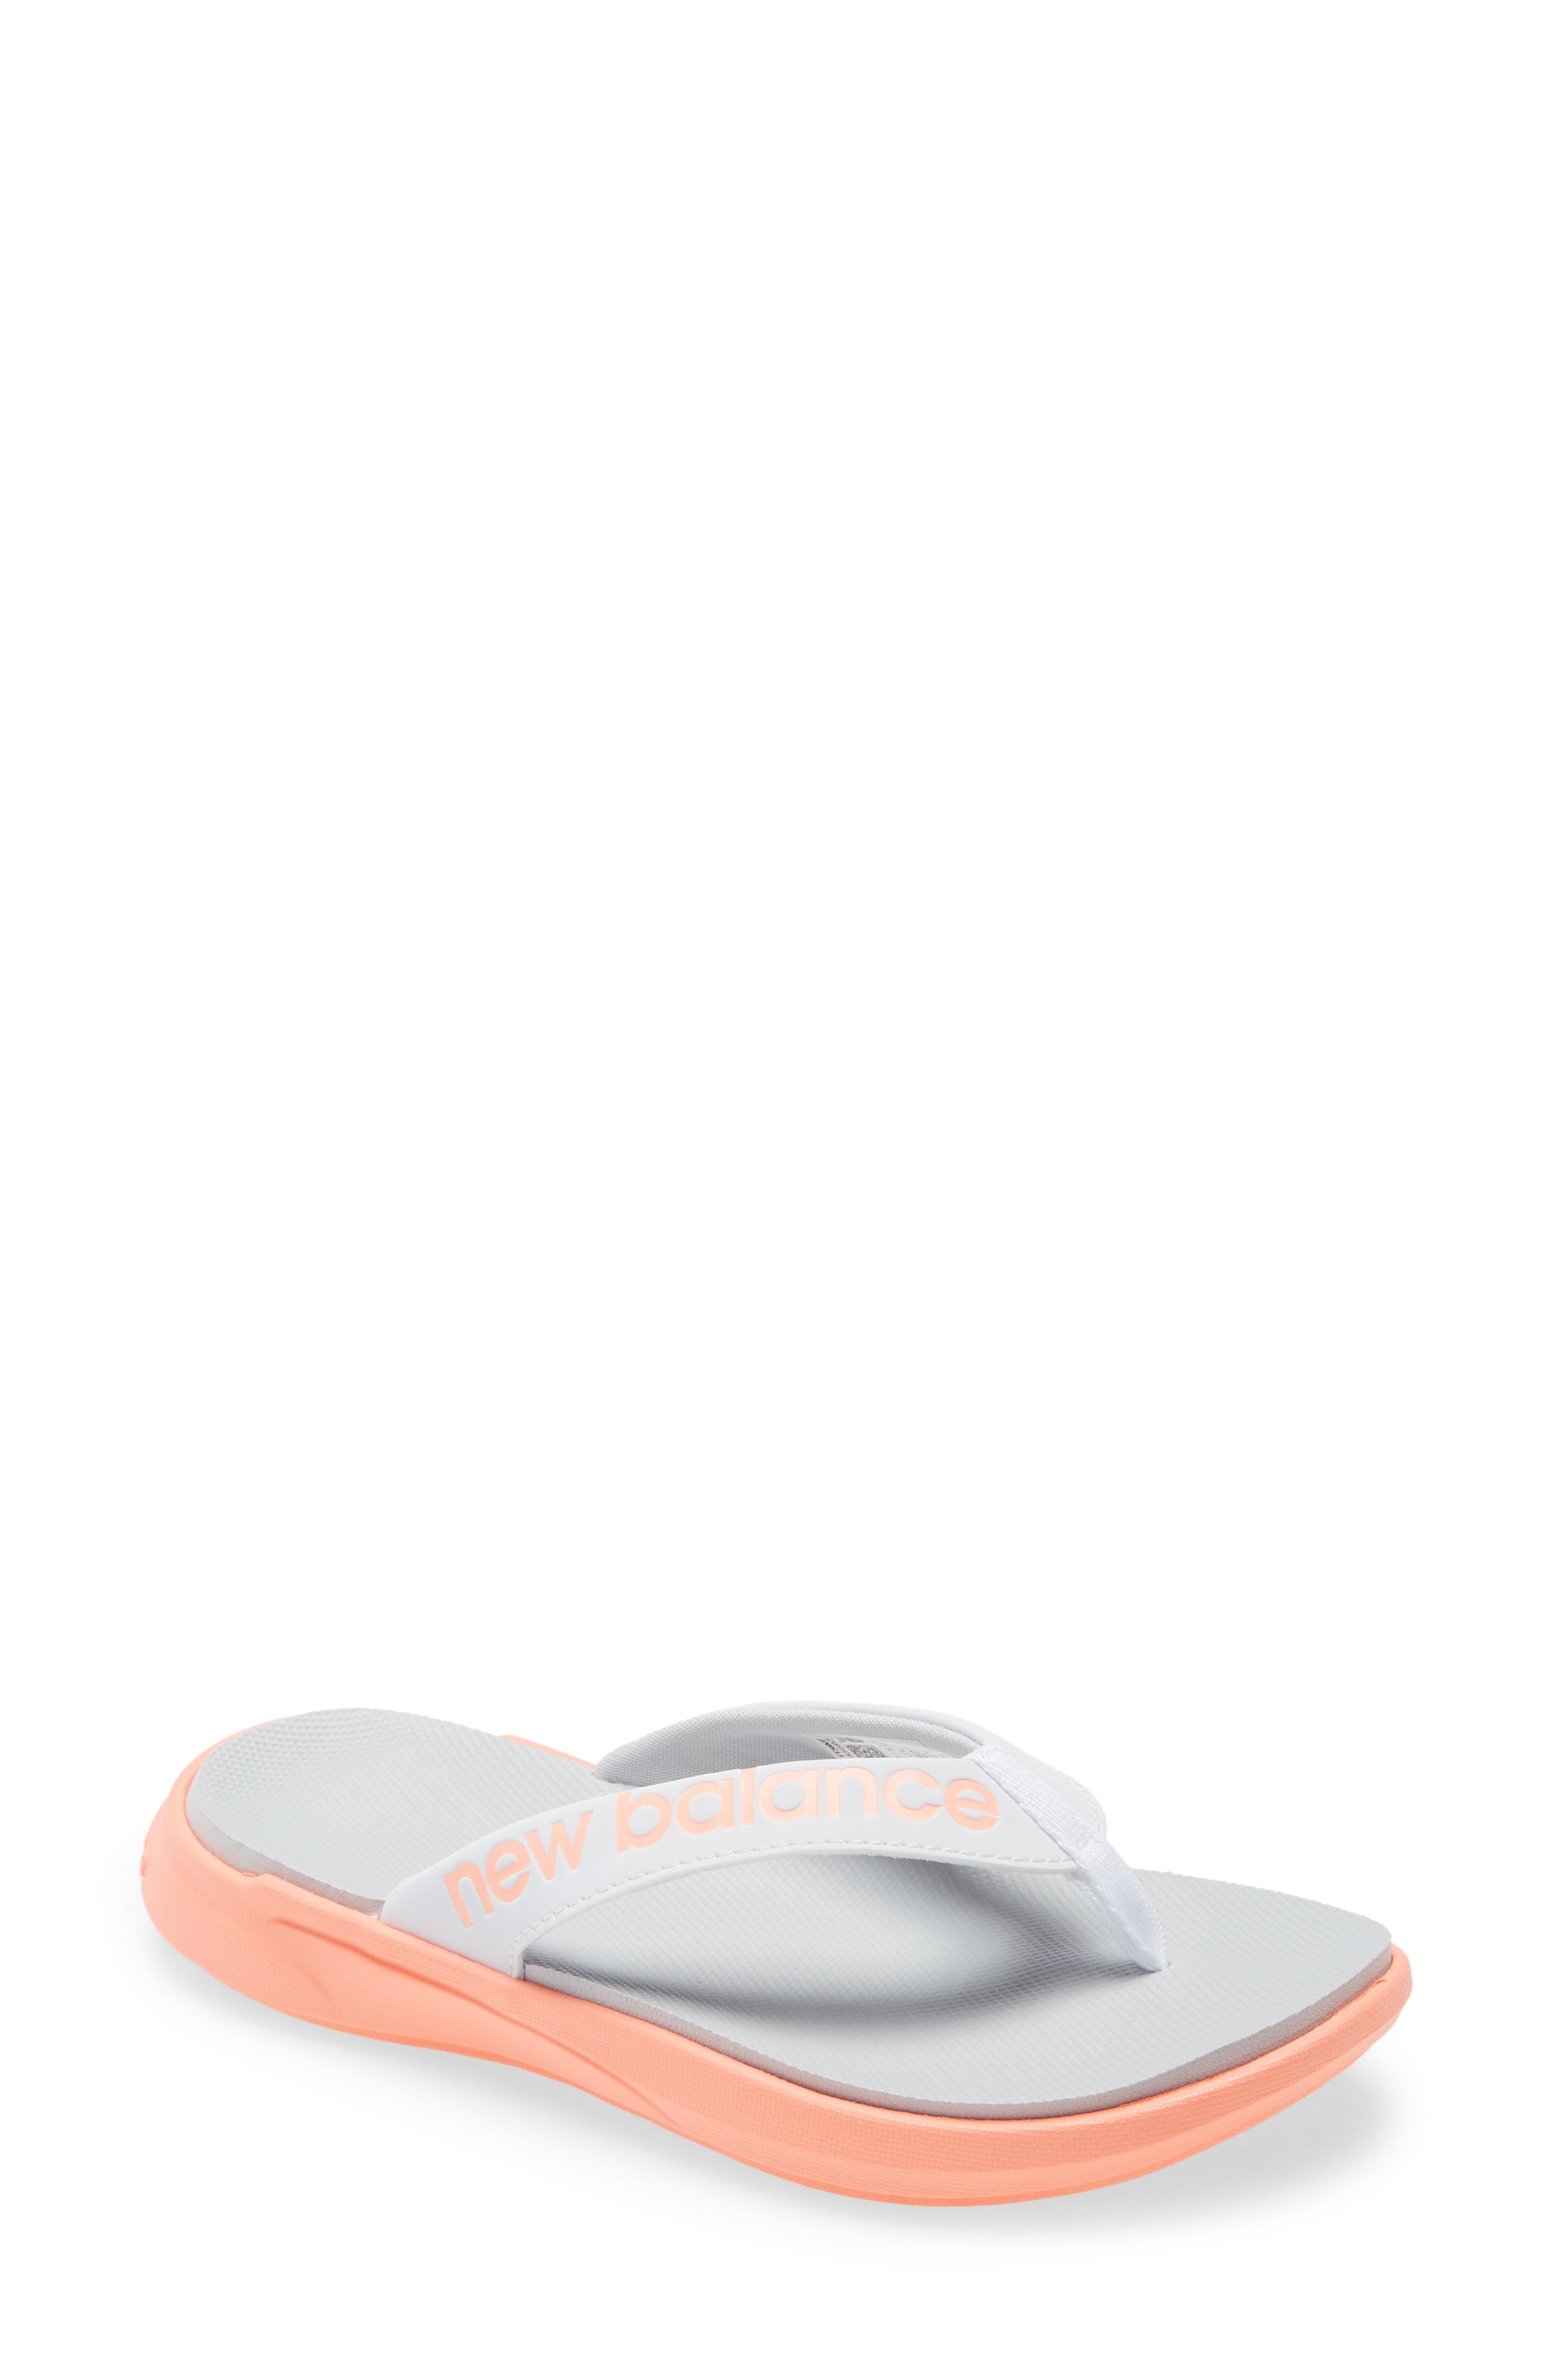 new balance flip flops with arch support women's